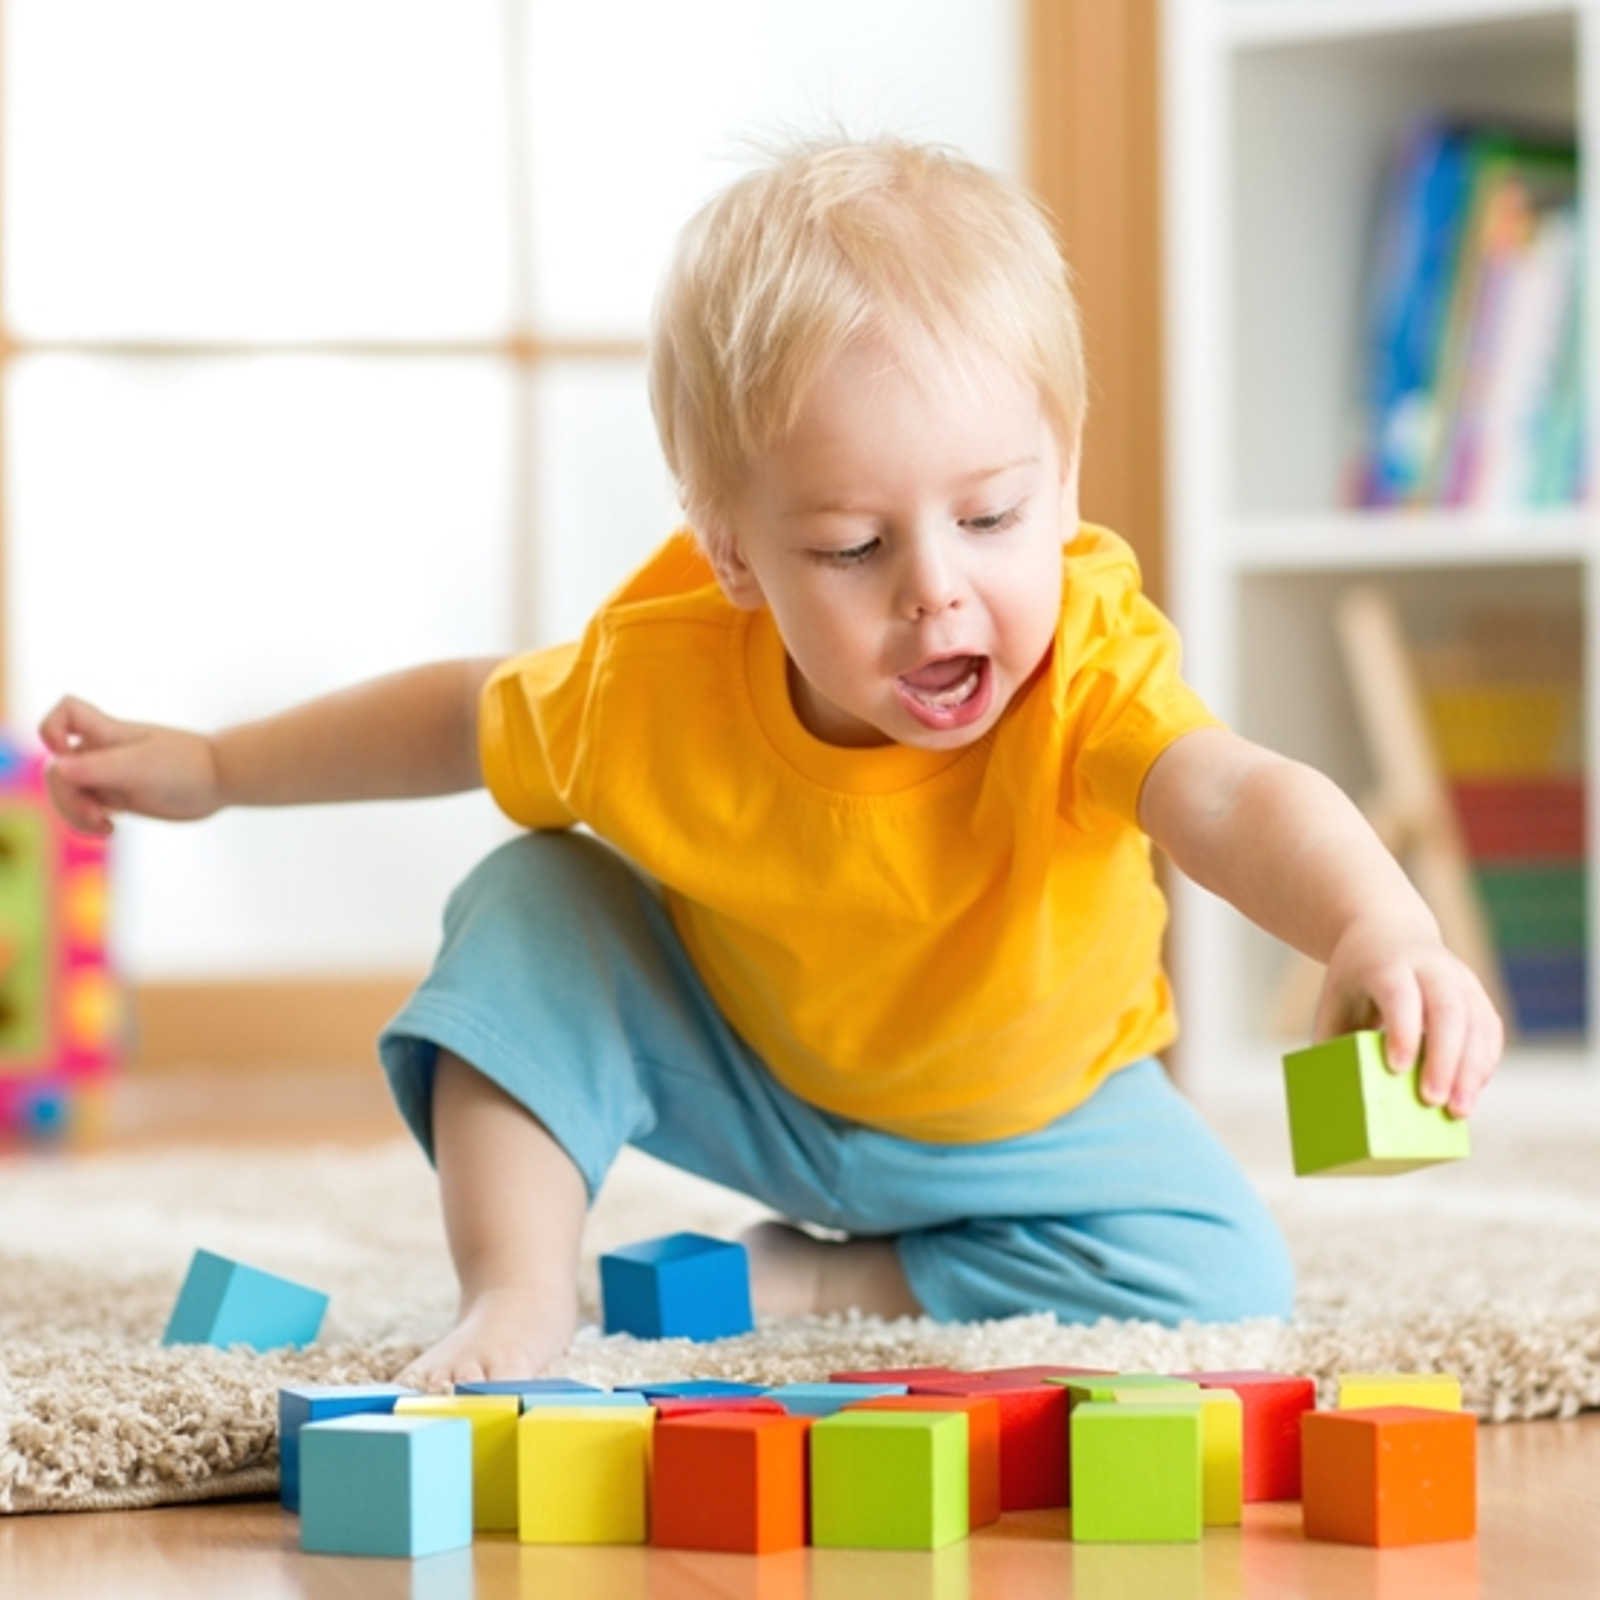 Small children in particular often play on the floor. Carpet heating is the ideal solution.